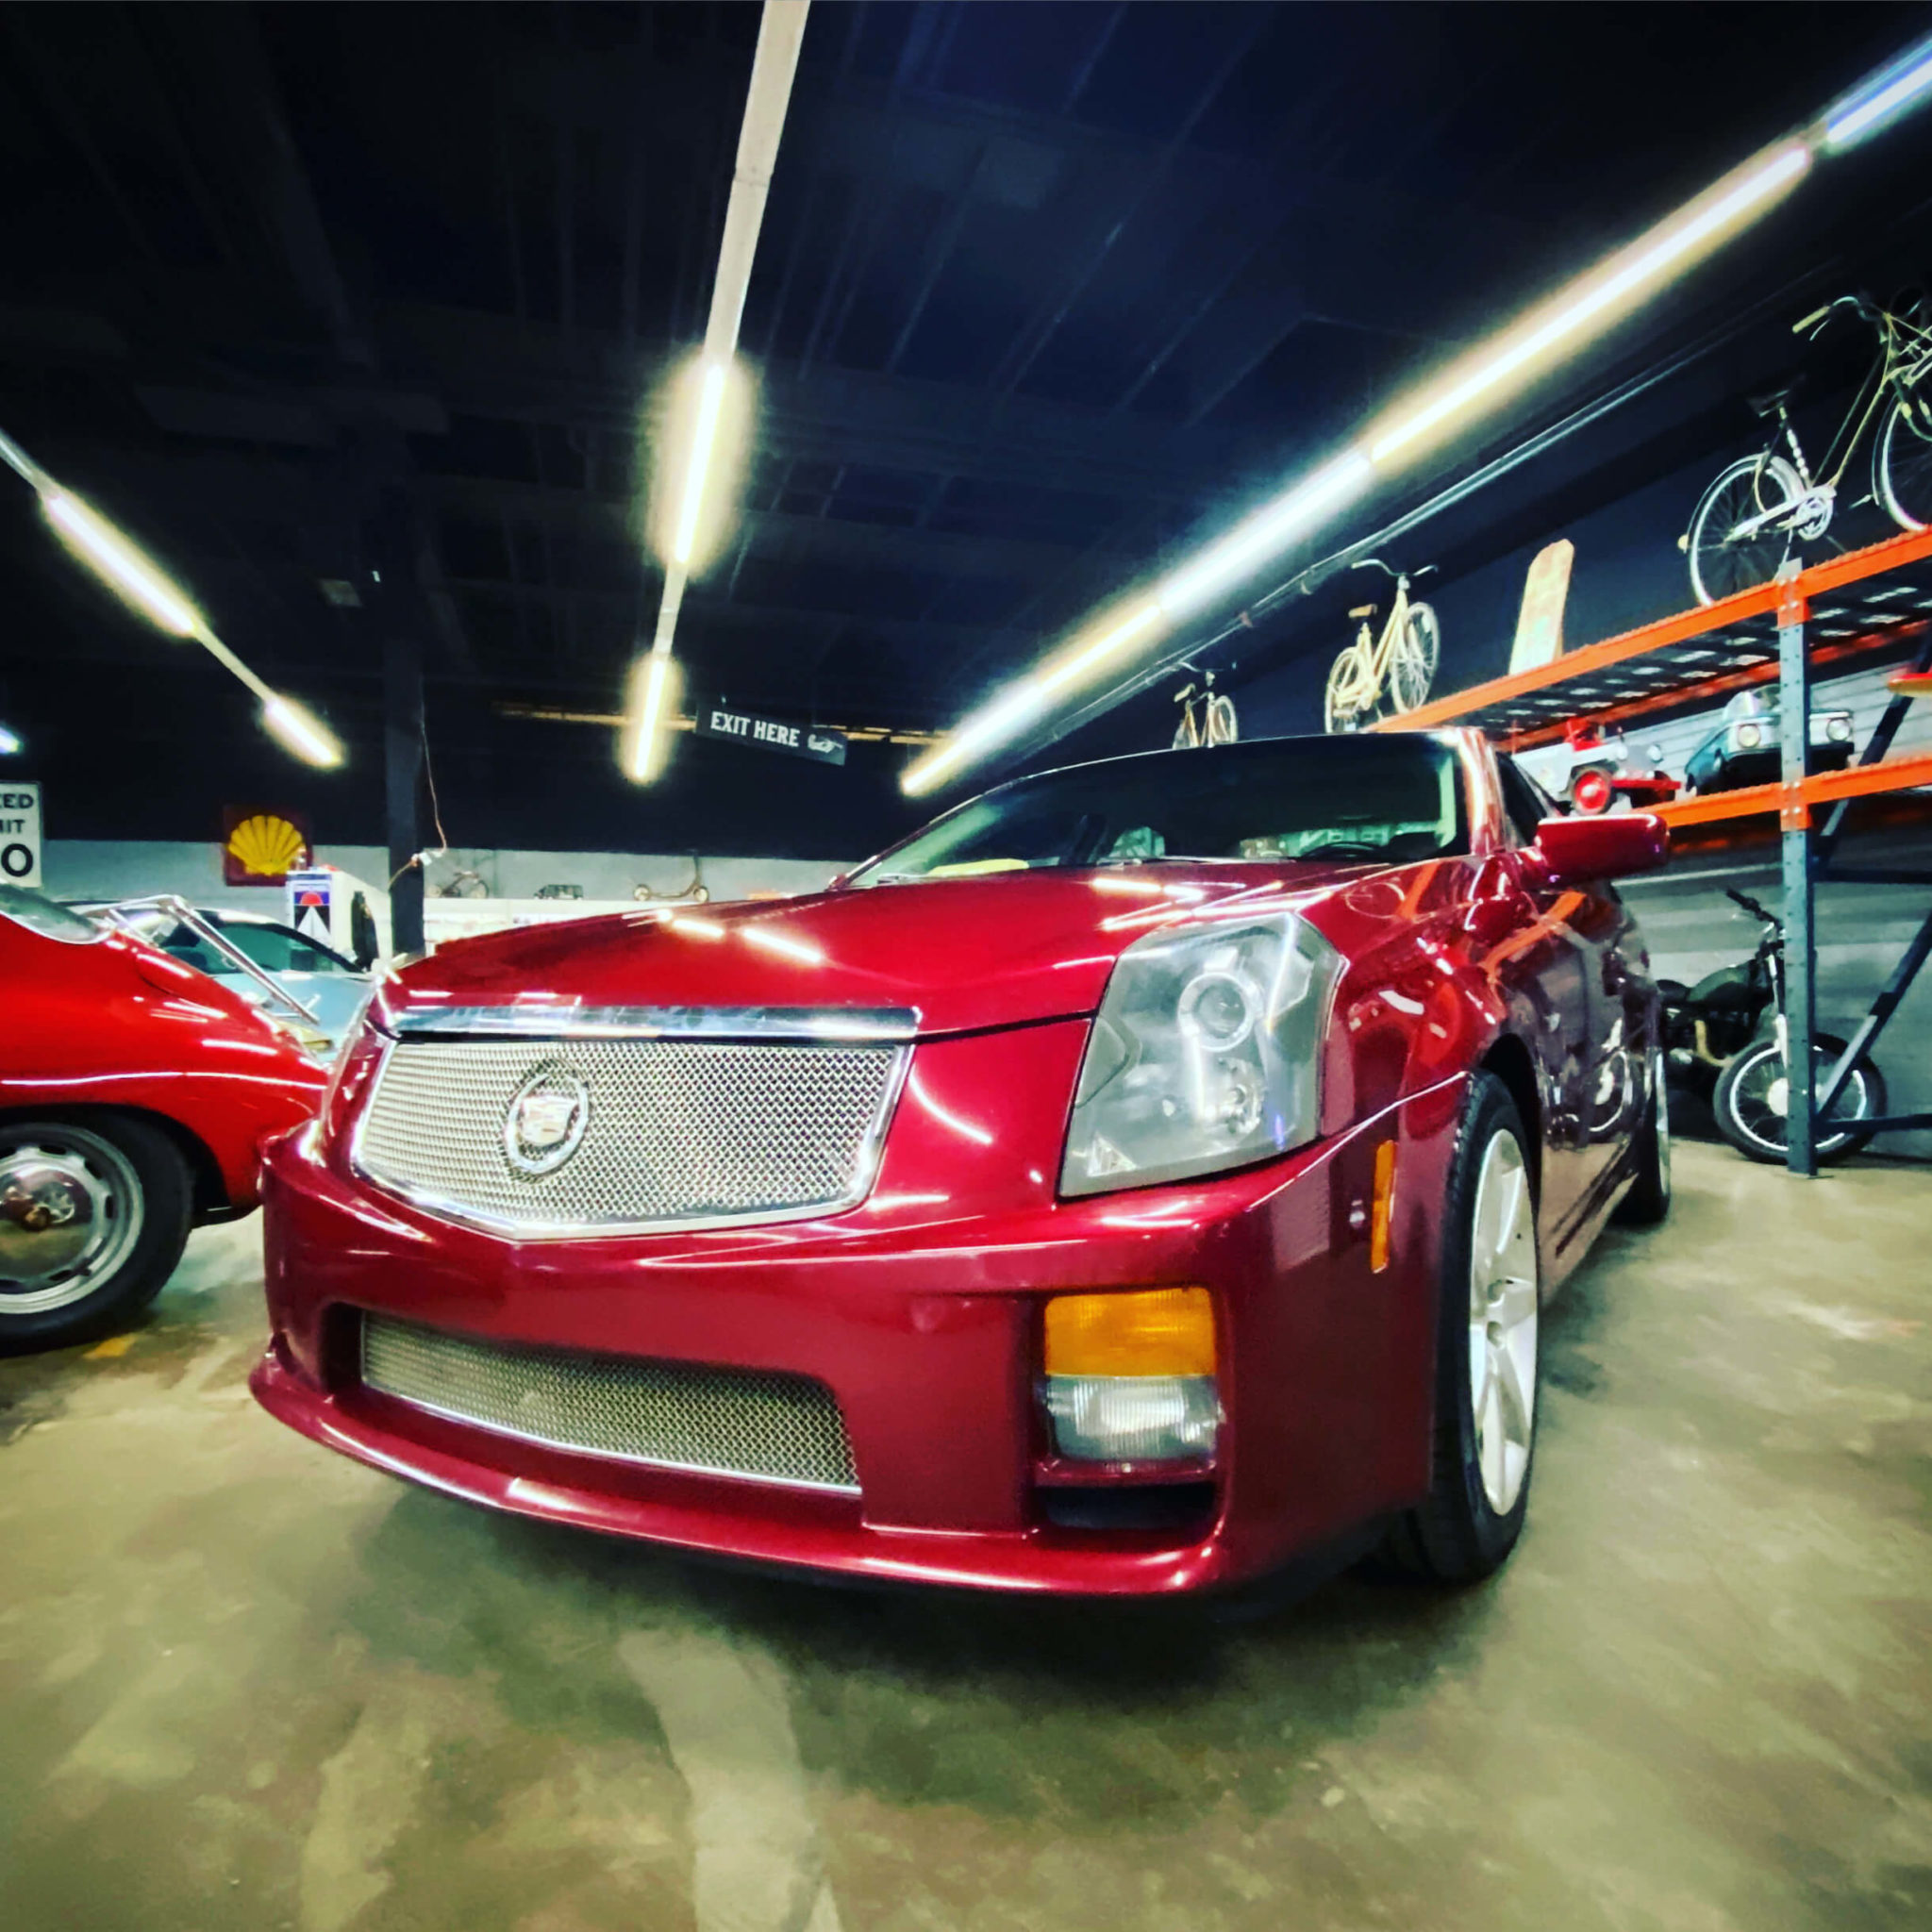 2005 Cadillac CTS-V | Miles Through Time